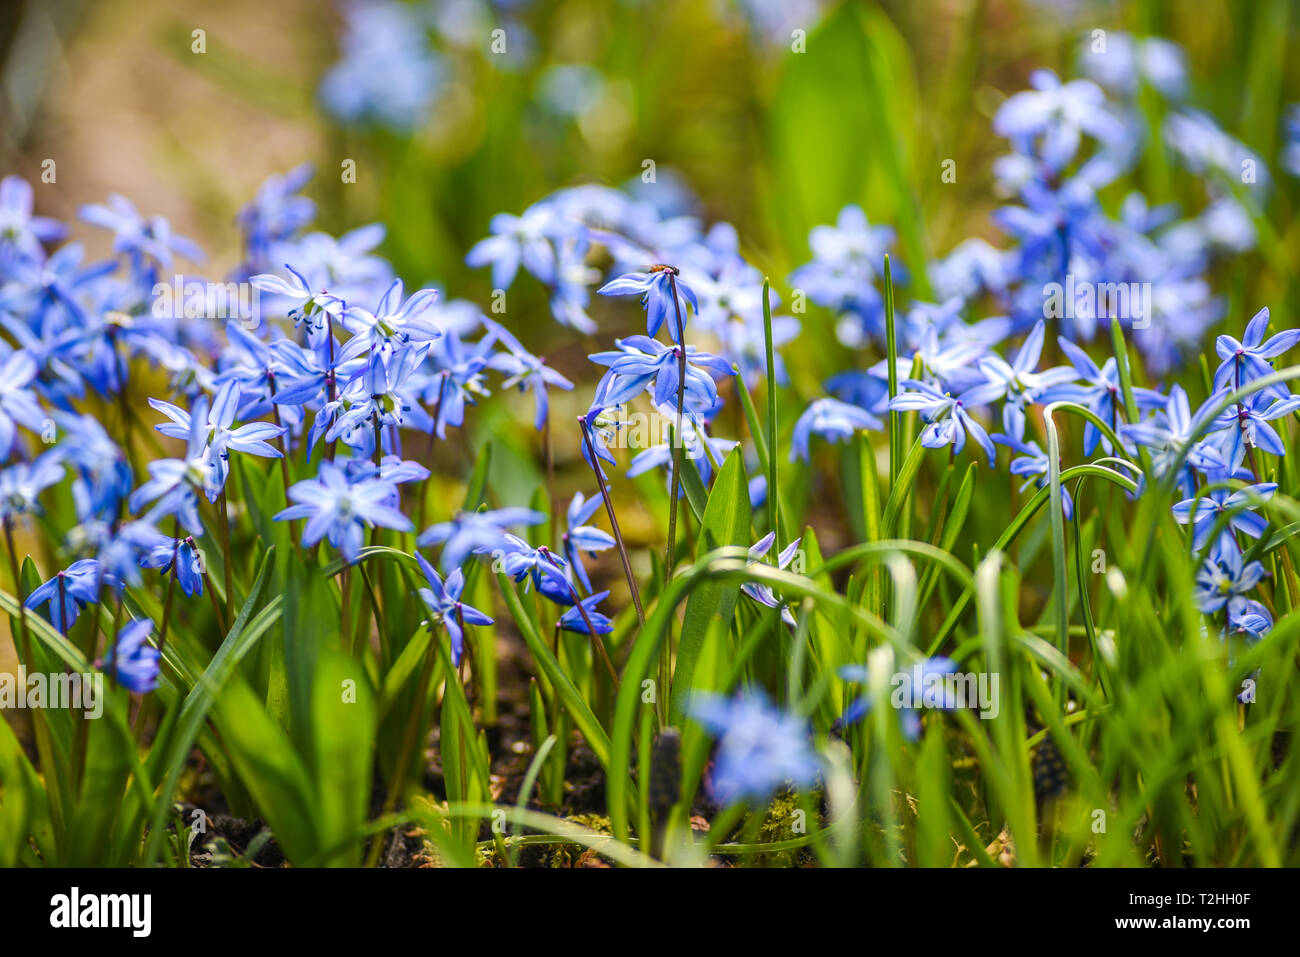 Chionodoxa luciliae blooming in spring in the garden. Stock Photo